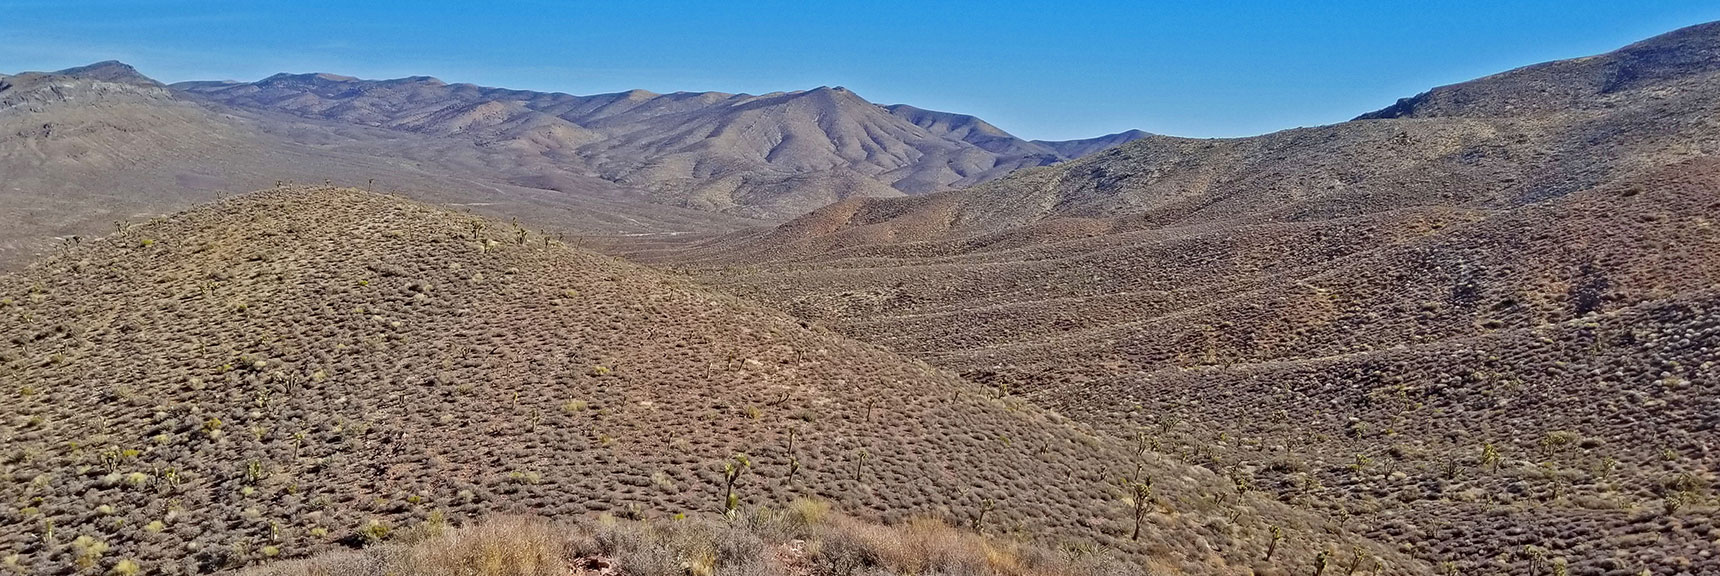 Decision Point After Many Ridges and Canyons. Turn Back or Continue Up? | Gass Peak Grand Crossing | Desert National Wildlife Refuge to Centennial Hills Las Vegas via Gass Peak Summit by Foot